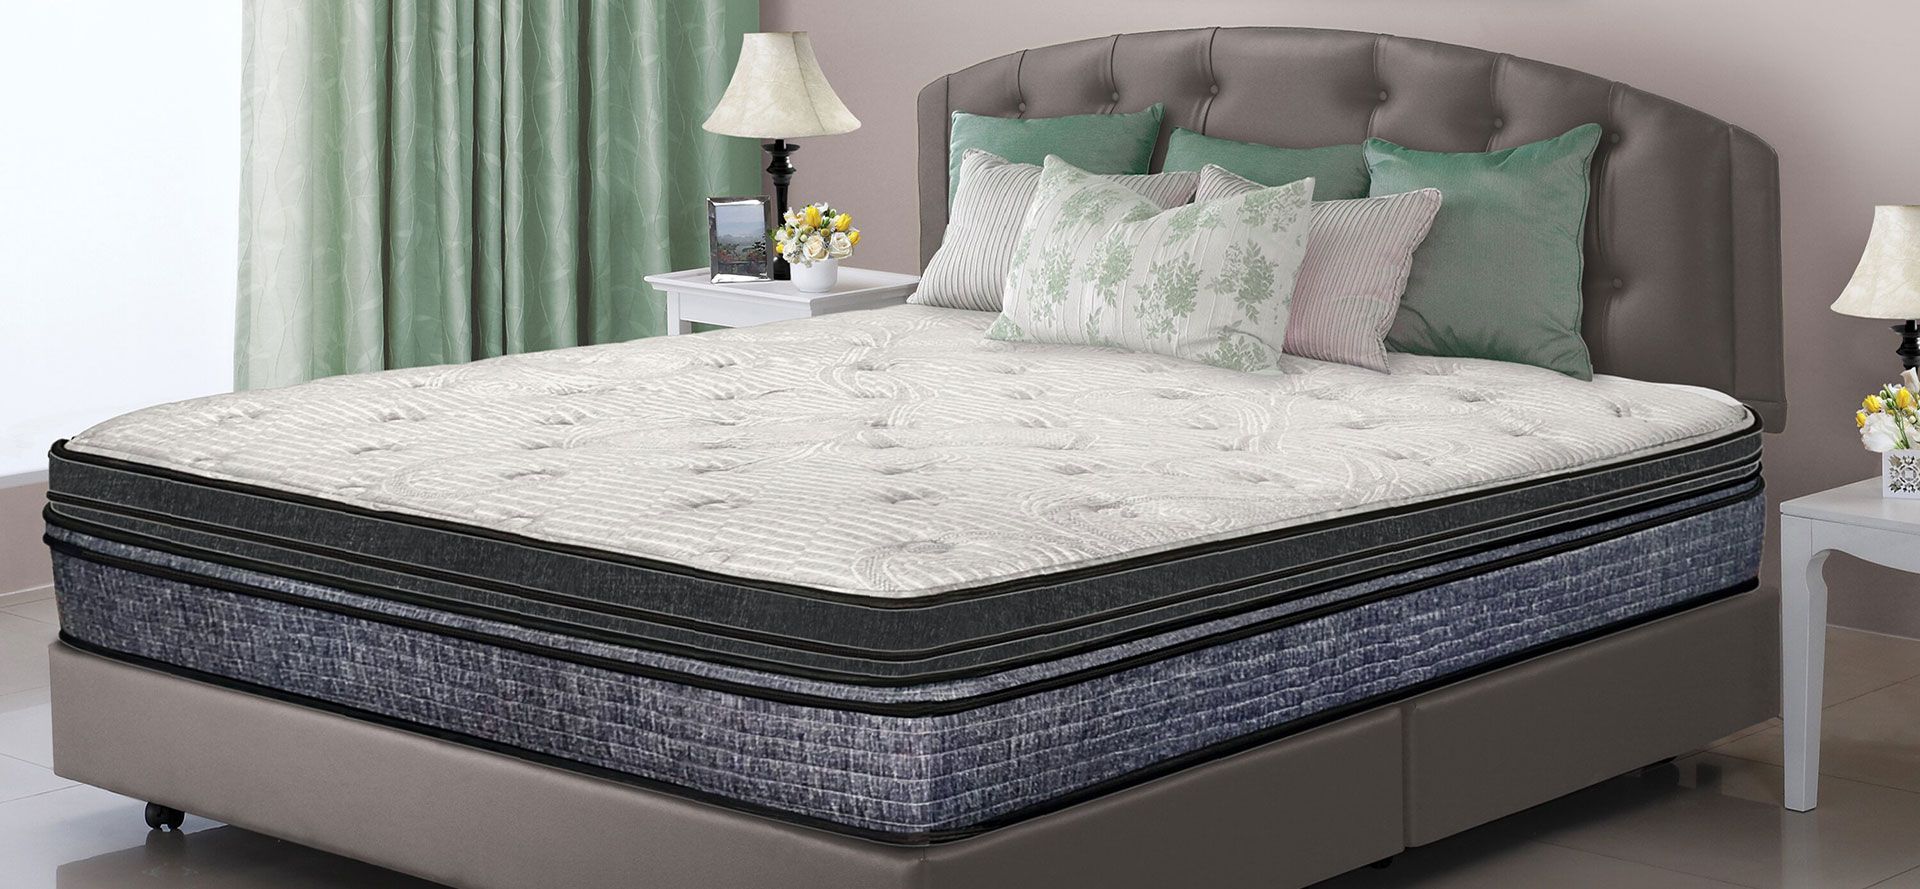 Waterbed Mattress With A Therapeutic And Soothing Effect.